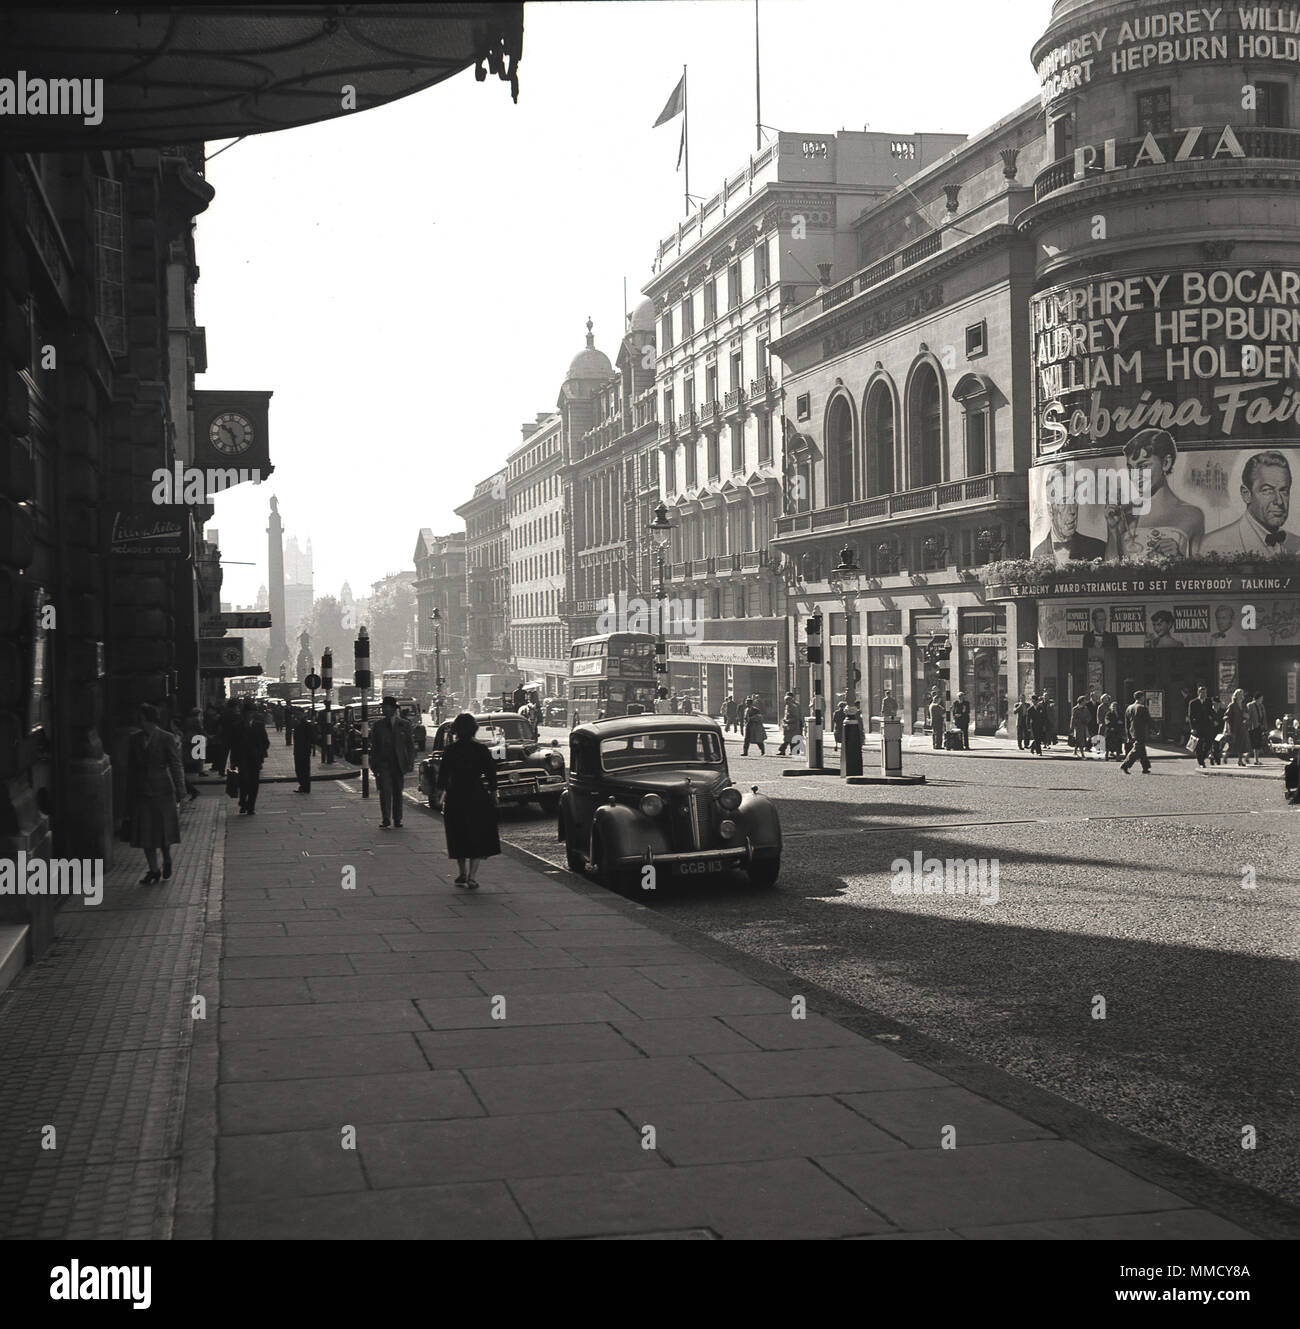 1954, historical, a view down Lower Regent Street from Piccadilly Circus, Westminster, London, England. The Plaza cinema (theatre) is on the right. Built for Paramount Pictures in 1926, the Plaza was a lavish building with seating for 1800 and a small stage. Advertised on its' exterior some of the greatest names in the movie world, Humphrey Bogart, Audrey Hepburn and William Holden, who were starring in the comedy-drama film 'Sabrina Fair', directed by  Billy Wilder.  The American made film was a Paramount Production Stock Photo